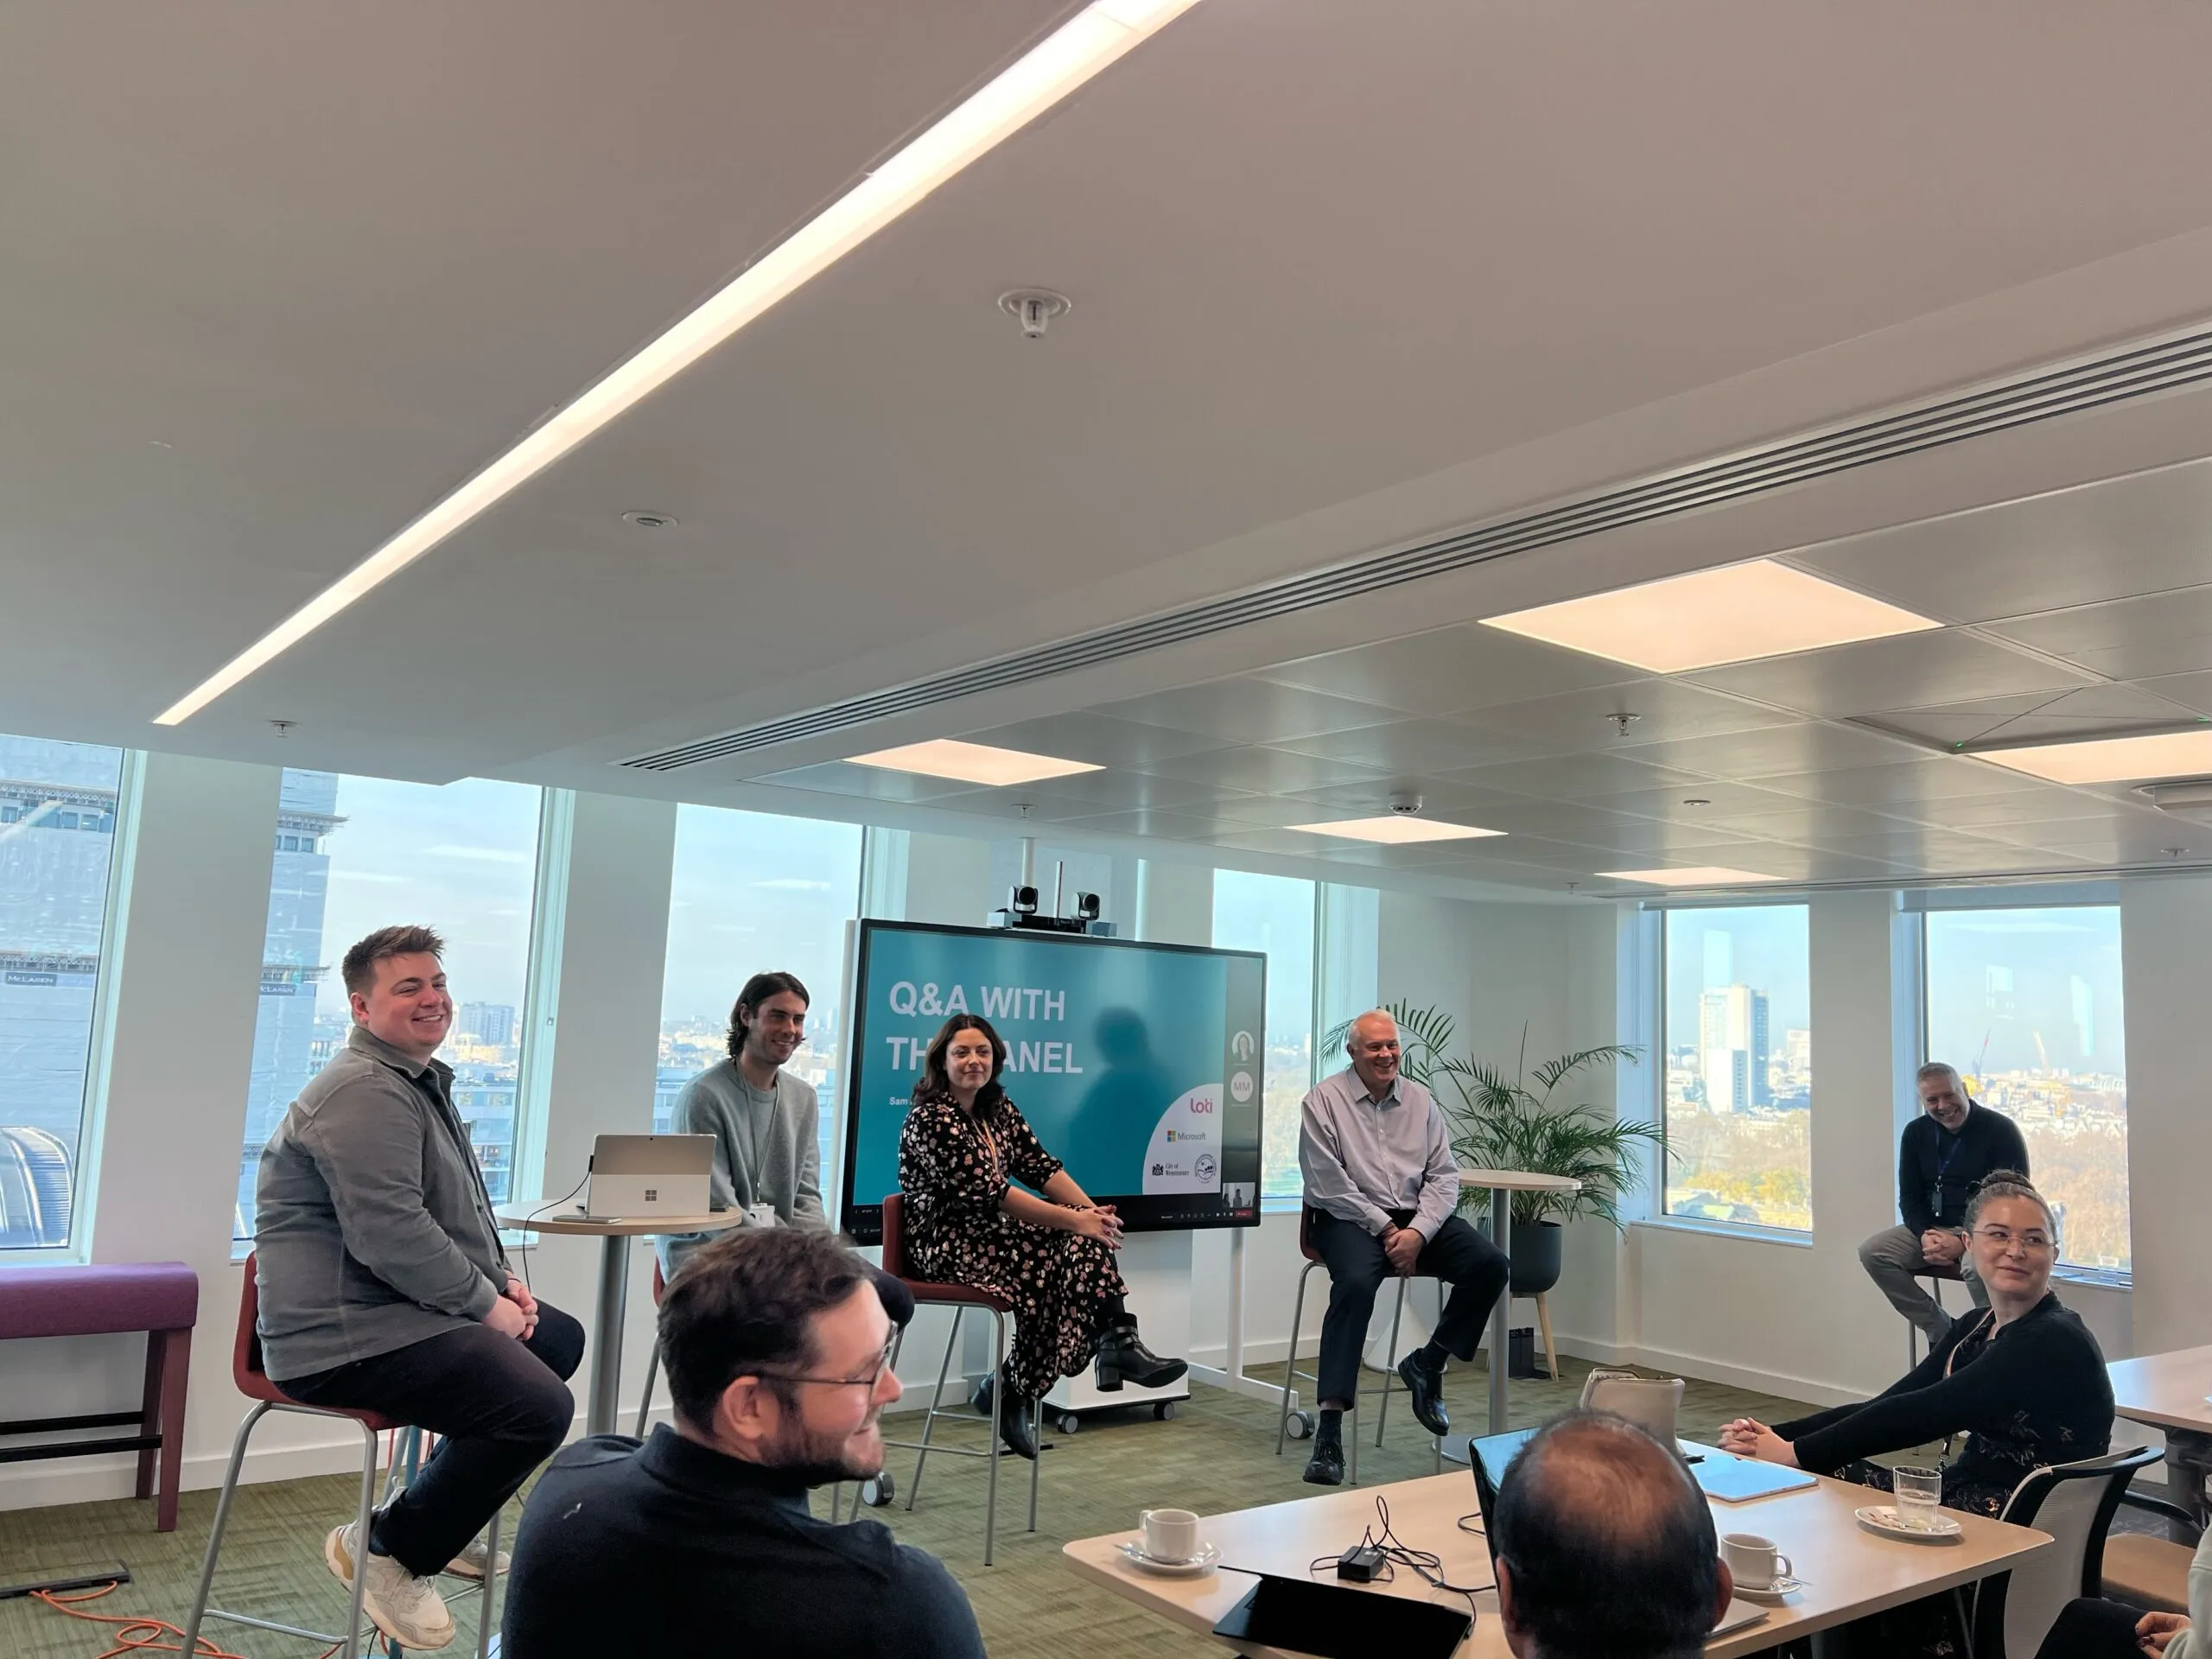 Q&A with panel. As pictured from left to right: Sam Nutt, Researcher & Data Ethicist (LOTI), Harry Reid (Microsoft), Becky Chapman, Chief Delivery & Engagement Officer, Digital & Innovation (Westminster City Council), Tony Ellis, Service Director IT (Buckinghamshire Council).